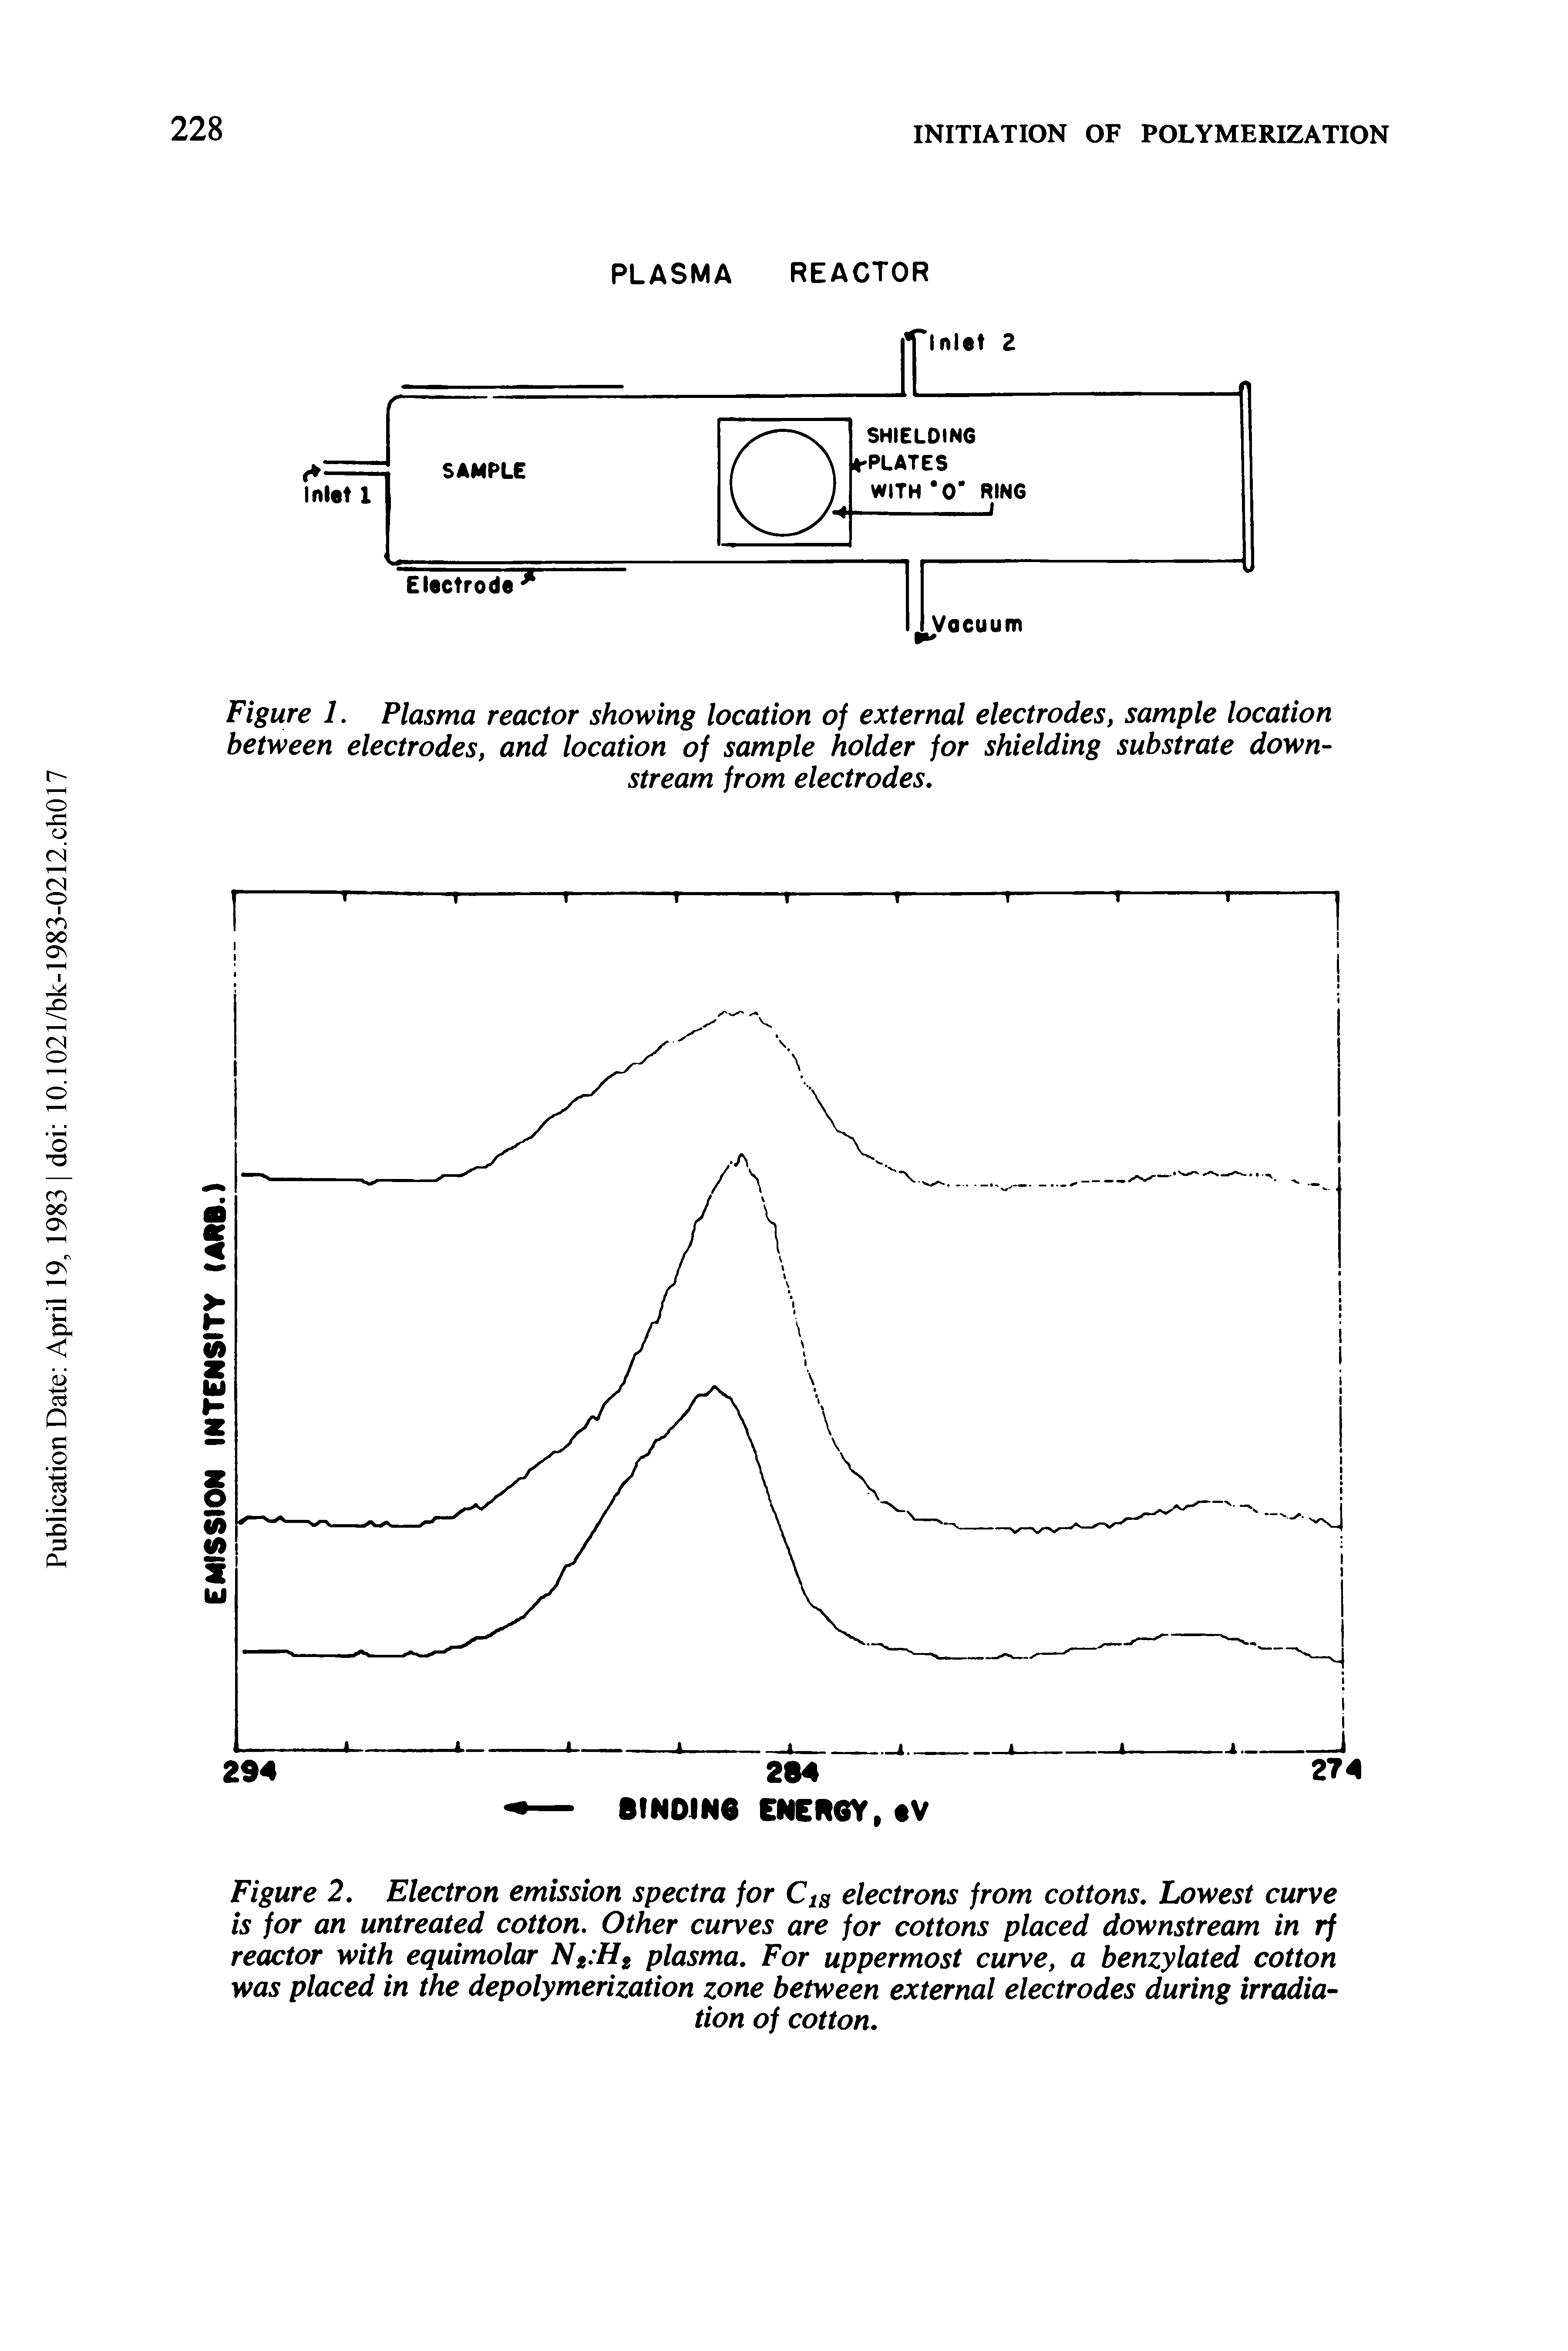 Figure 2, Electron emission spectra for Cjs electrons from cottons. Lowest curve is for an untreated cotton. Other curves are for cottons placed downstream in rf reactor with equimolar plasma. For uppermost curve, a benzylated cotton...